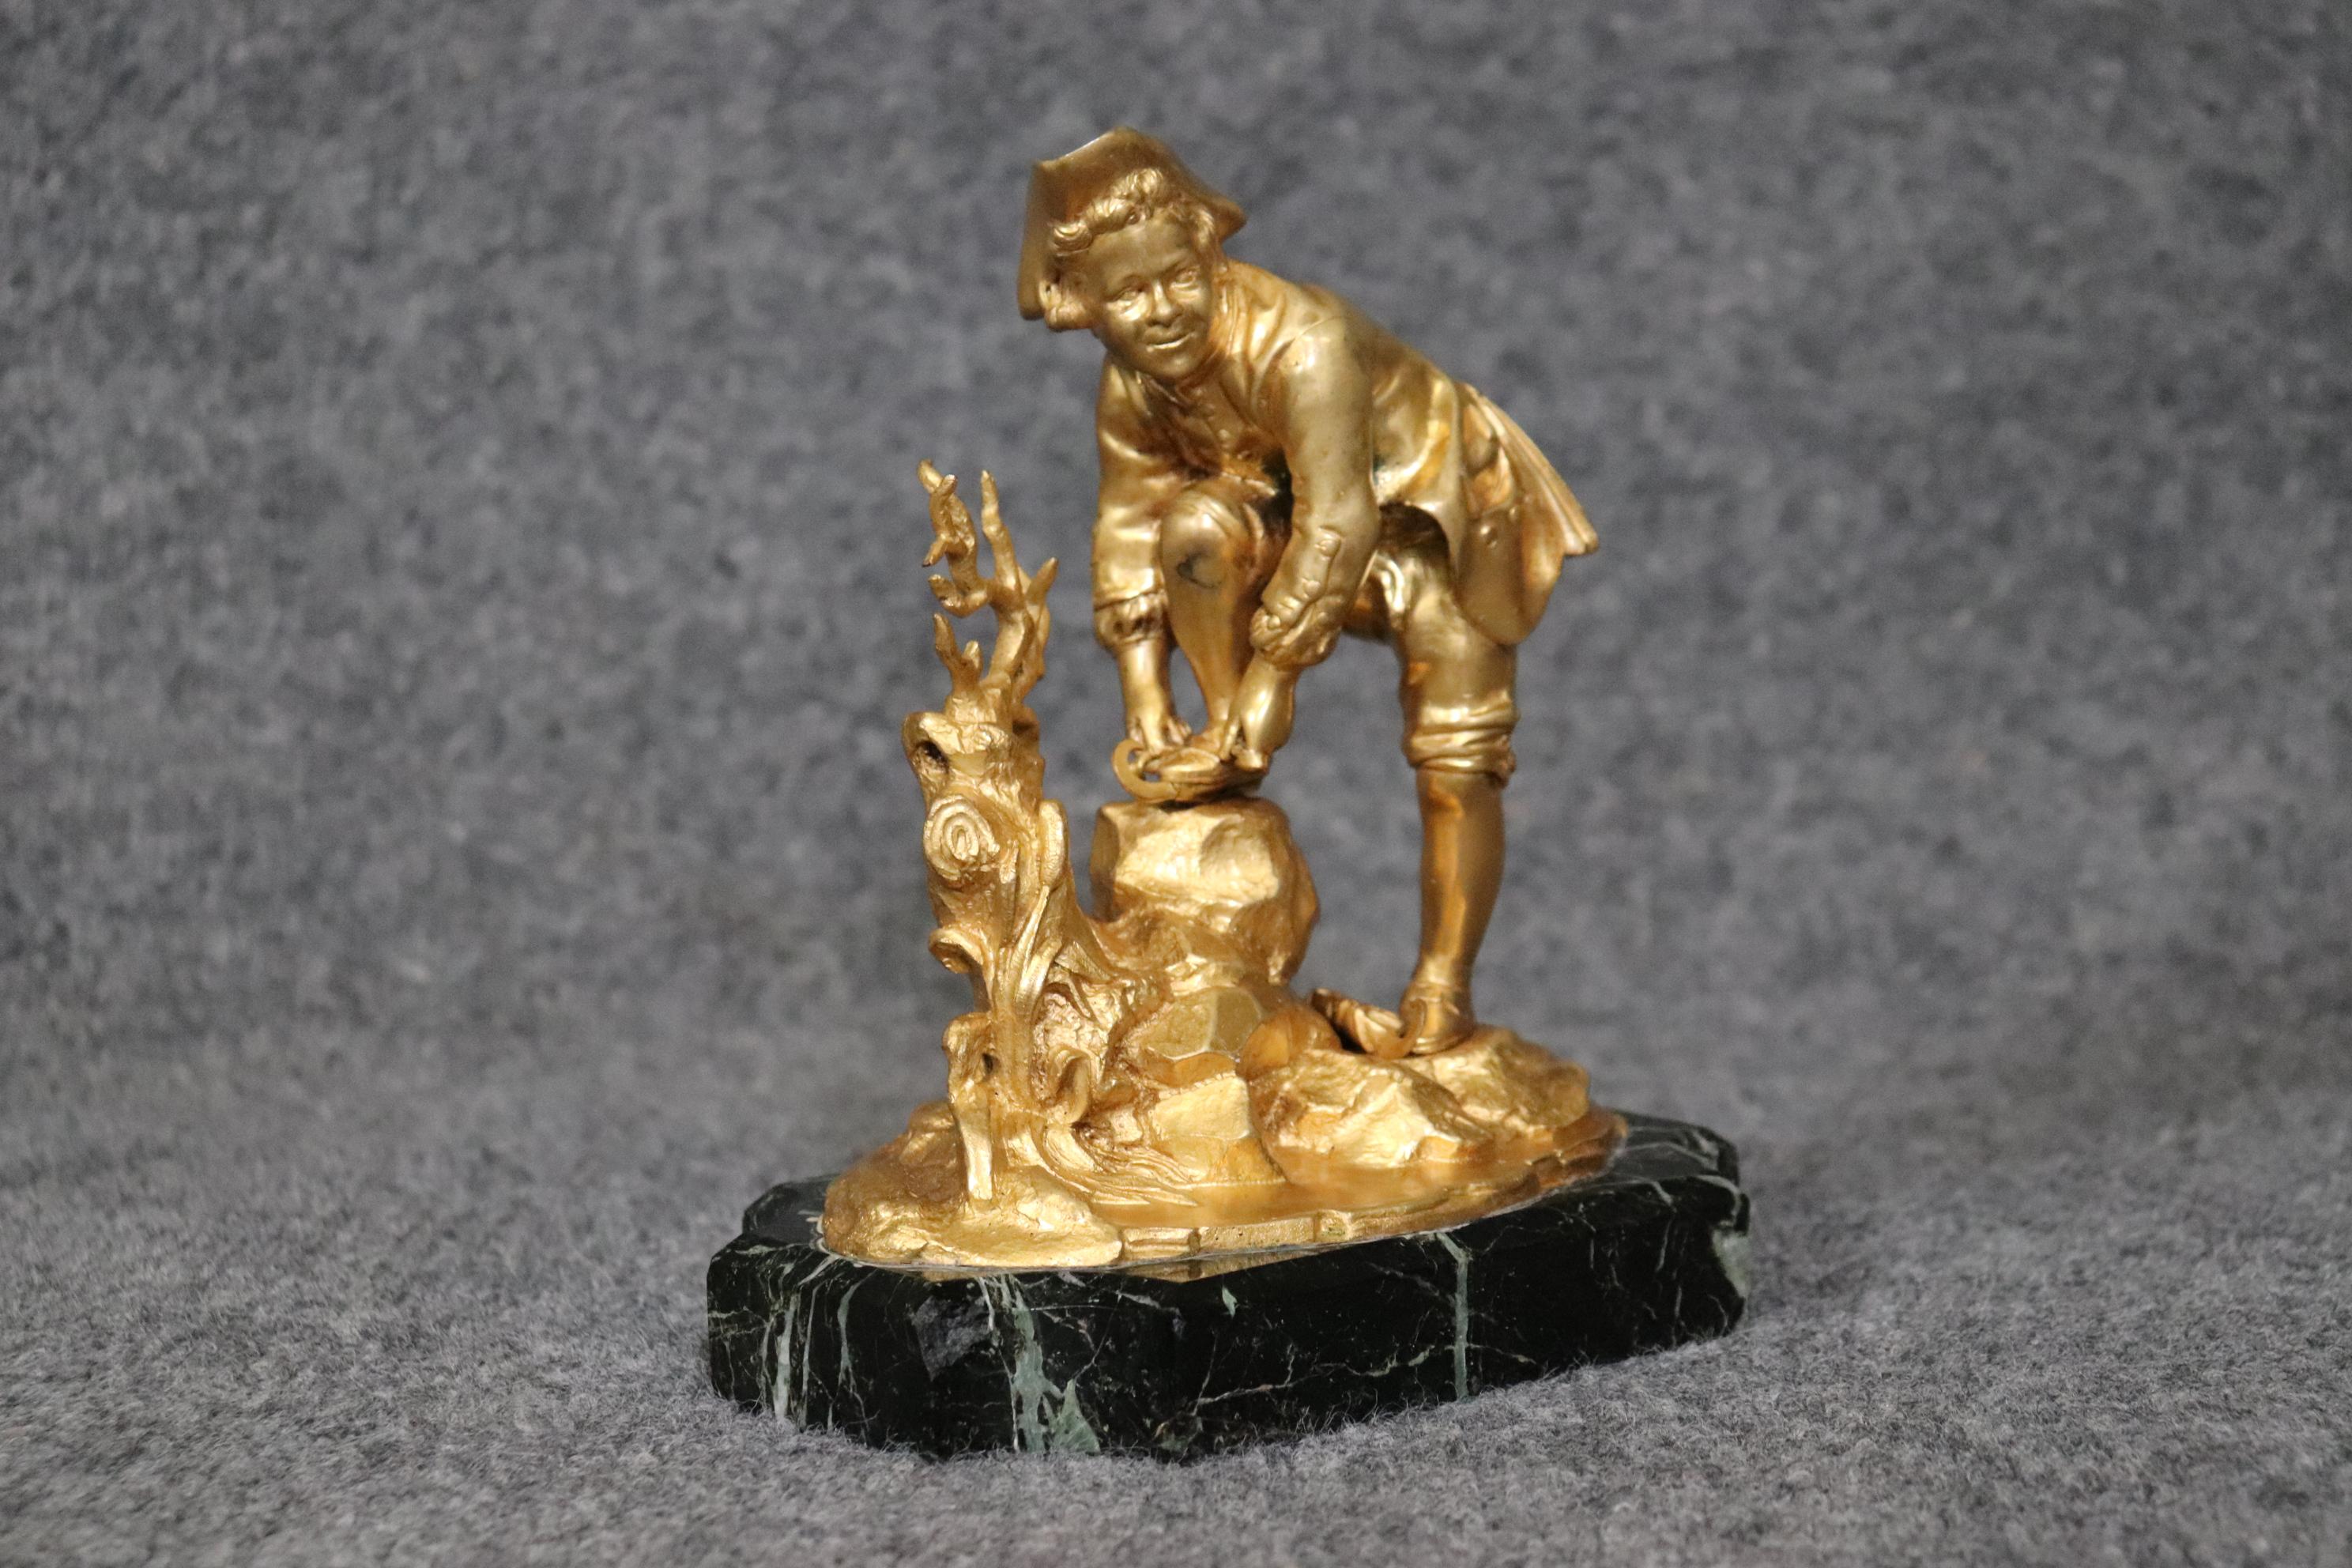 Dimensions- H: 12 1/2in W: 12in D: 4in 

This late 19th Century Russian bronze ormolu sculpture of a boy is made of the highest quality! This antique sculpture features a lovely marble base as well as an incredibly detailed ormolu sculpture of a boy